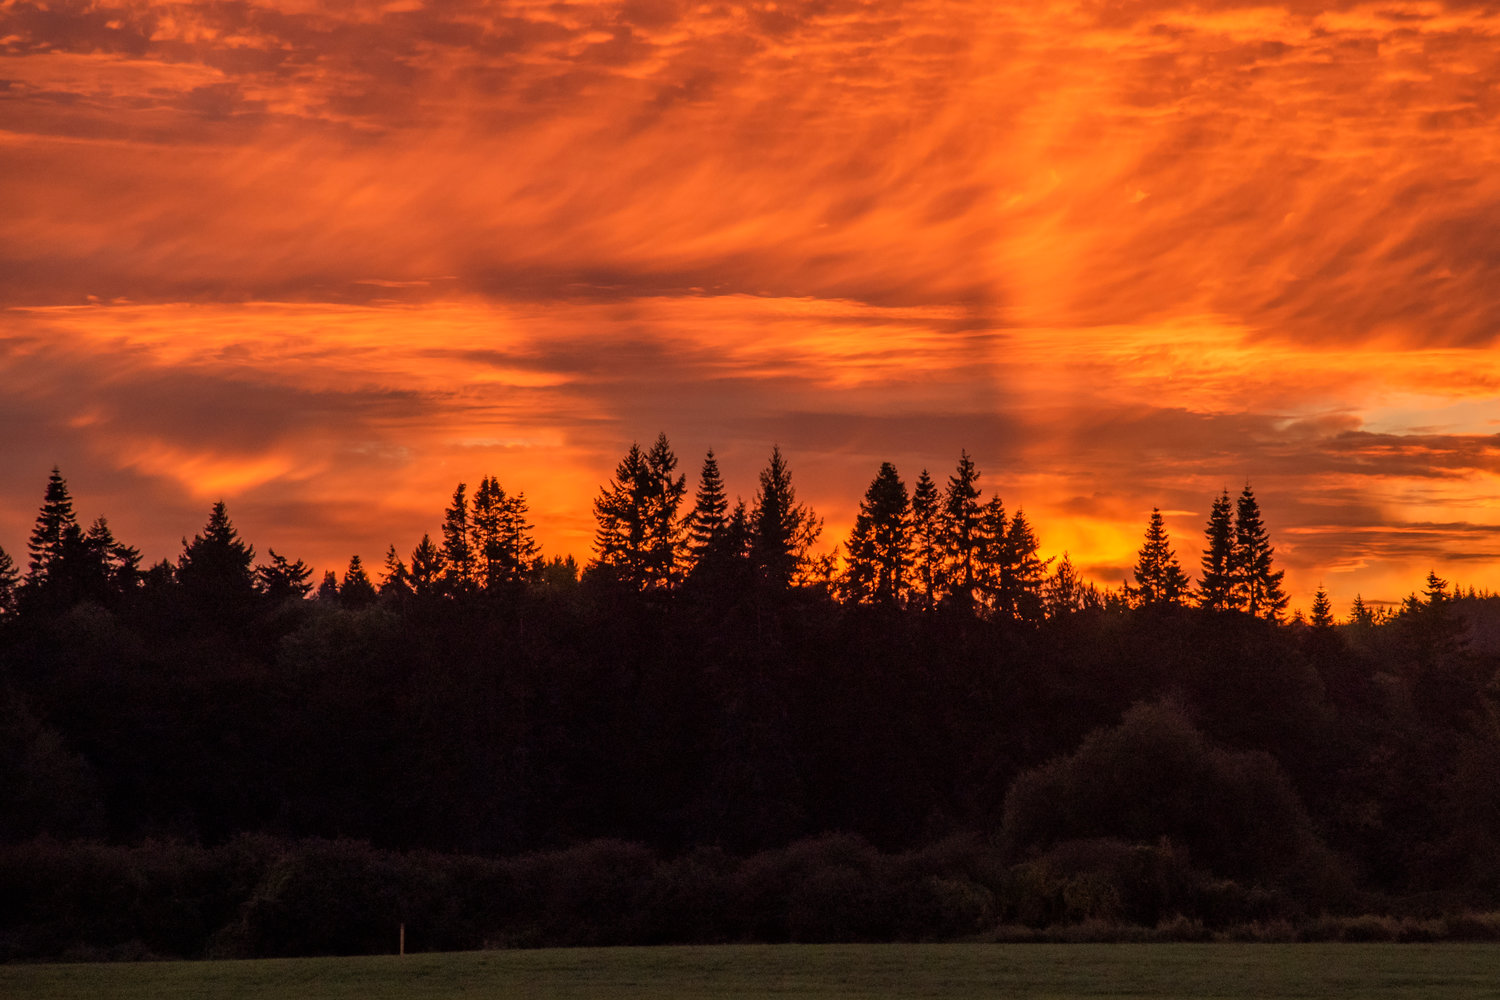 Before rain returned to the forecast on Sunday night, Southwest Washington residents were treated to a dazzling sunset on Friday. This photograph was taken in Grand Mound.